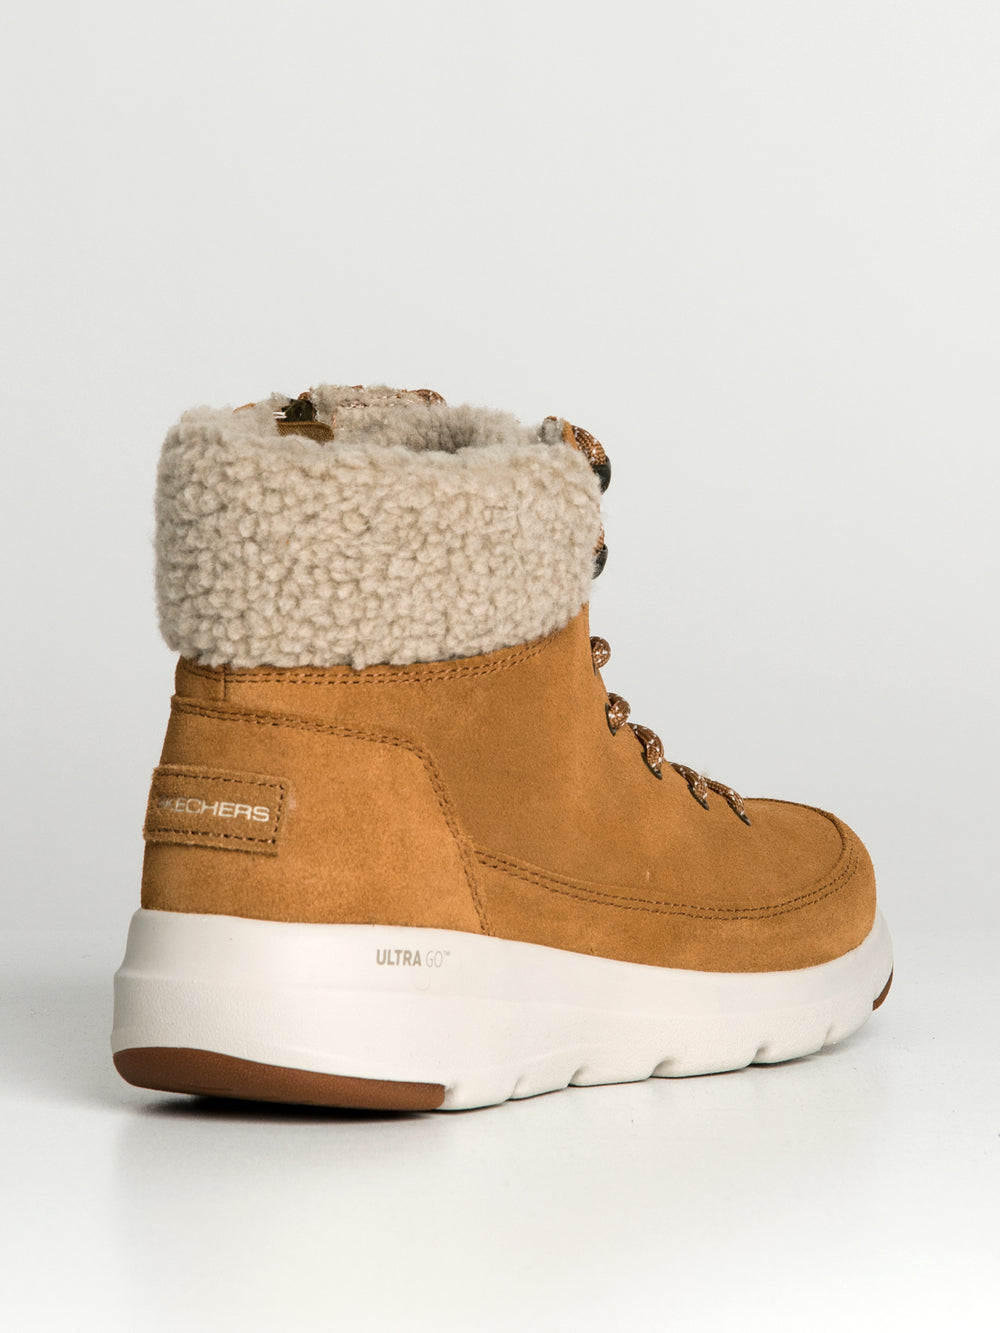 WOMENS SKECHERS ON THE GO GLACIAL ULTRA BOOT